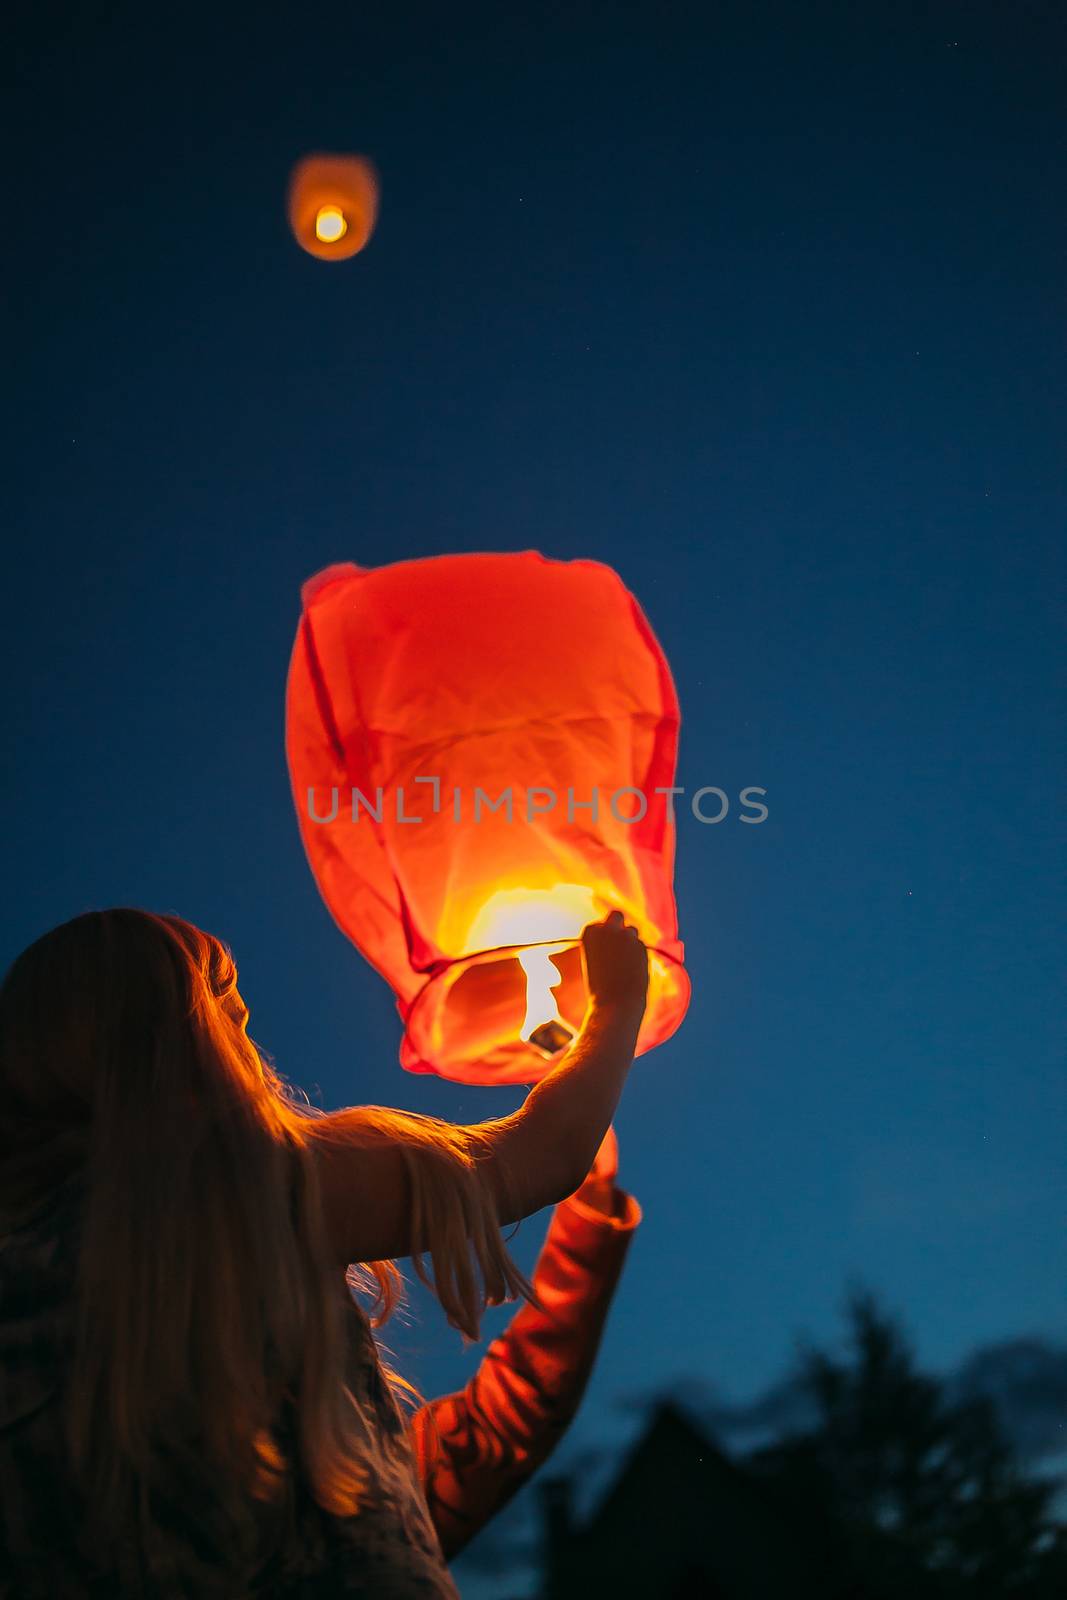 Launching Chinese lanterns at a street party by Opikanets